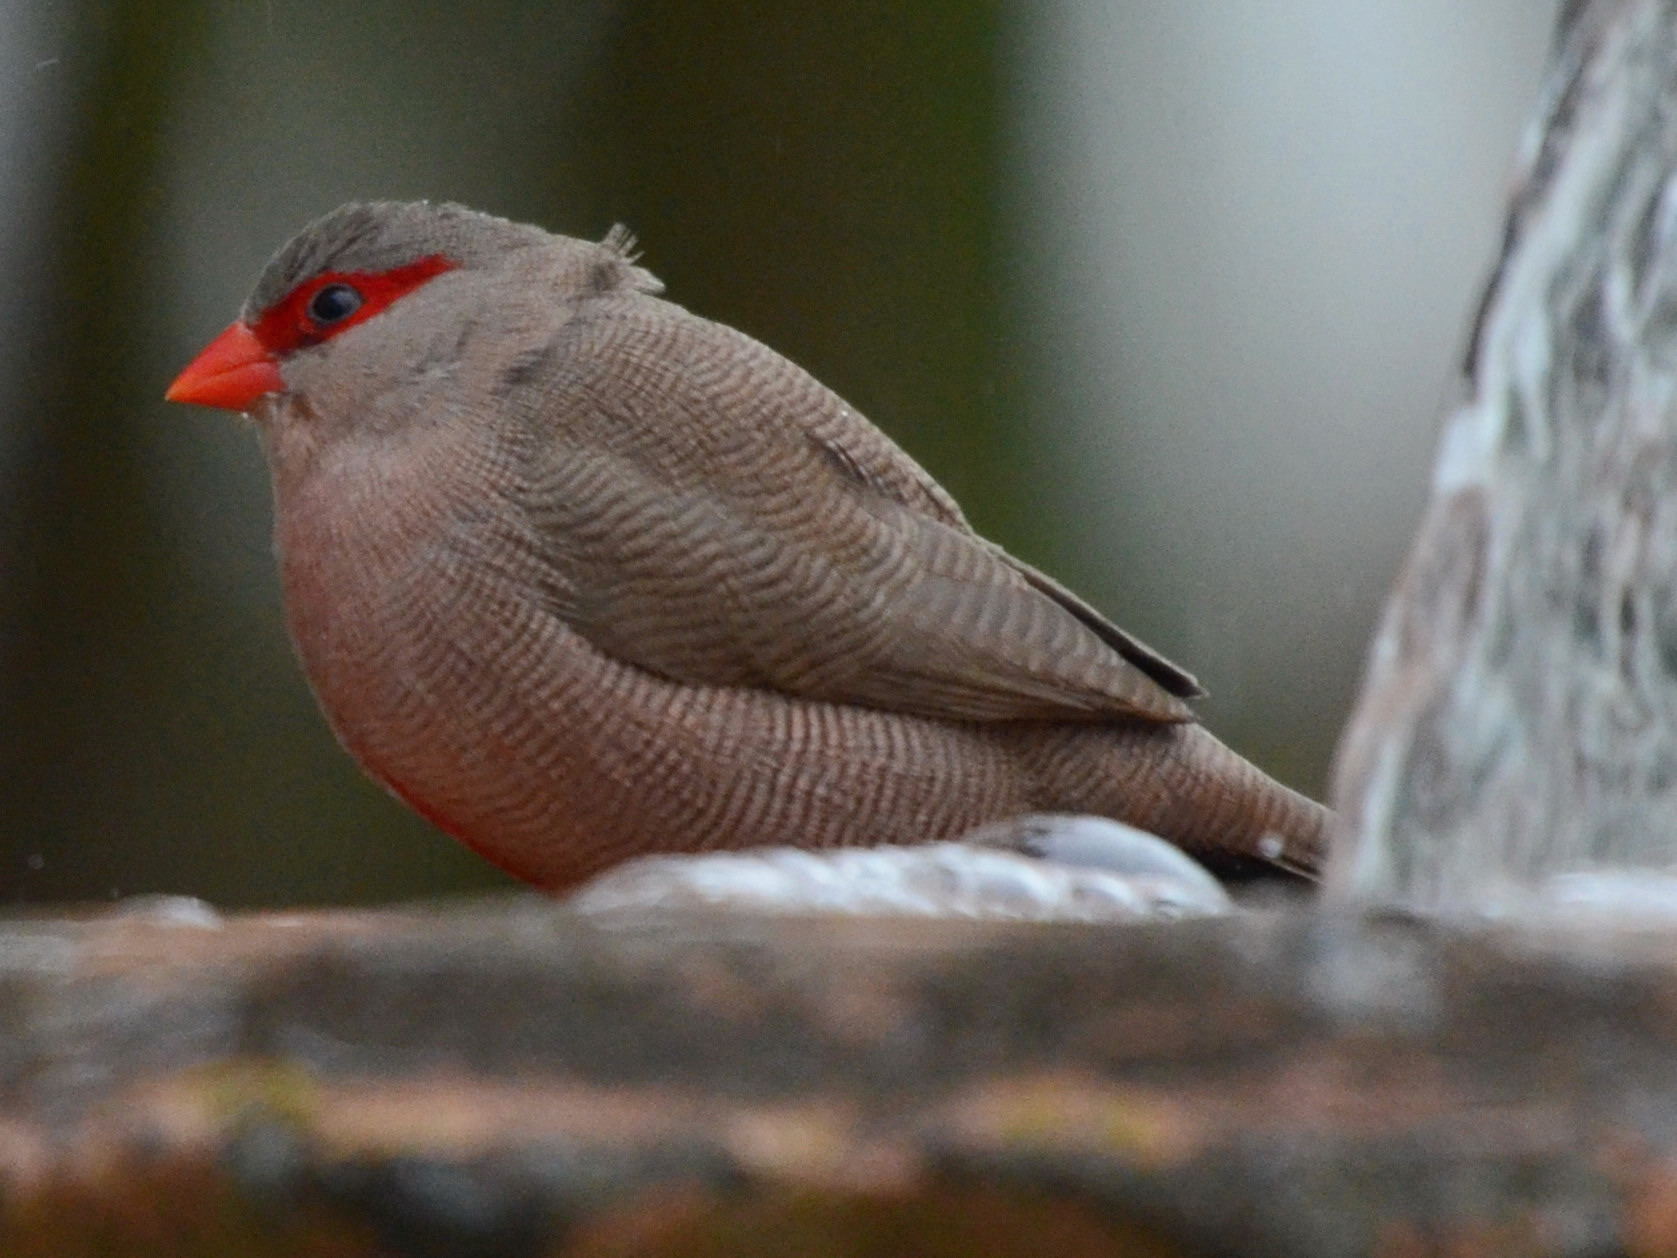 Click picture to see more Common Waxbills.